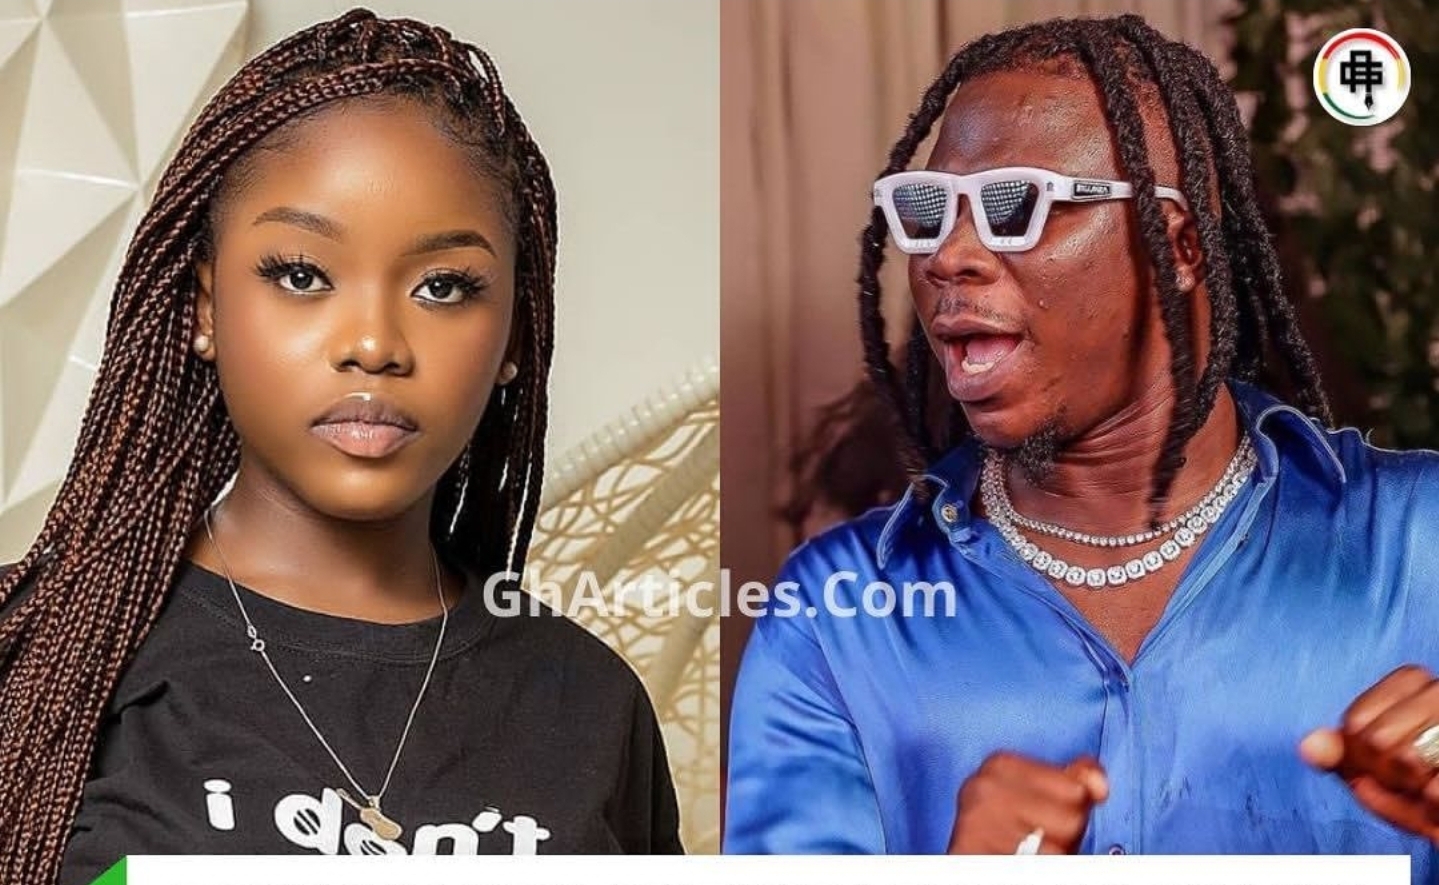 'If You Know Your Talent E Good oo' - Fans Praise Gyakie And Stonebwoy Ahead Of Possible Collaboration